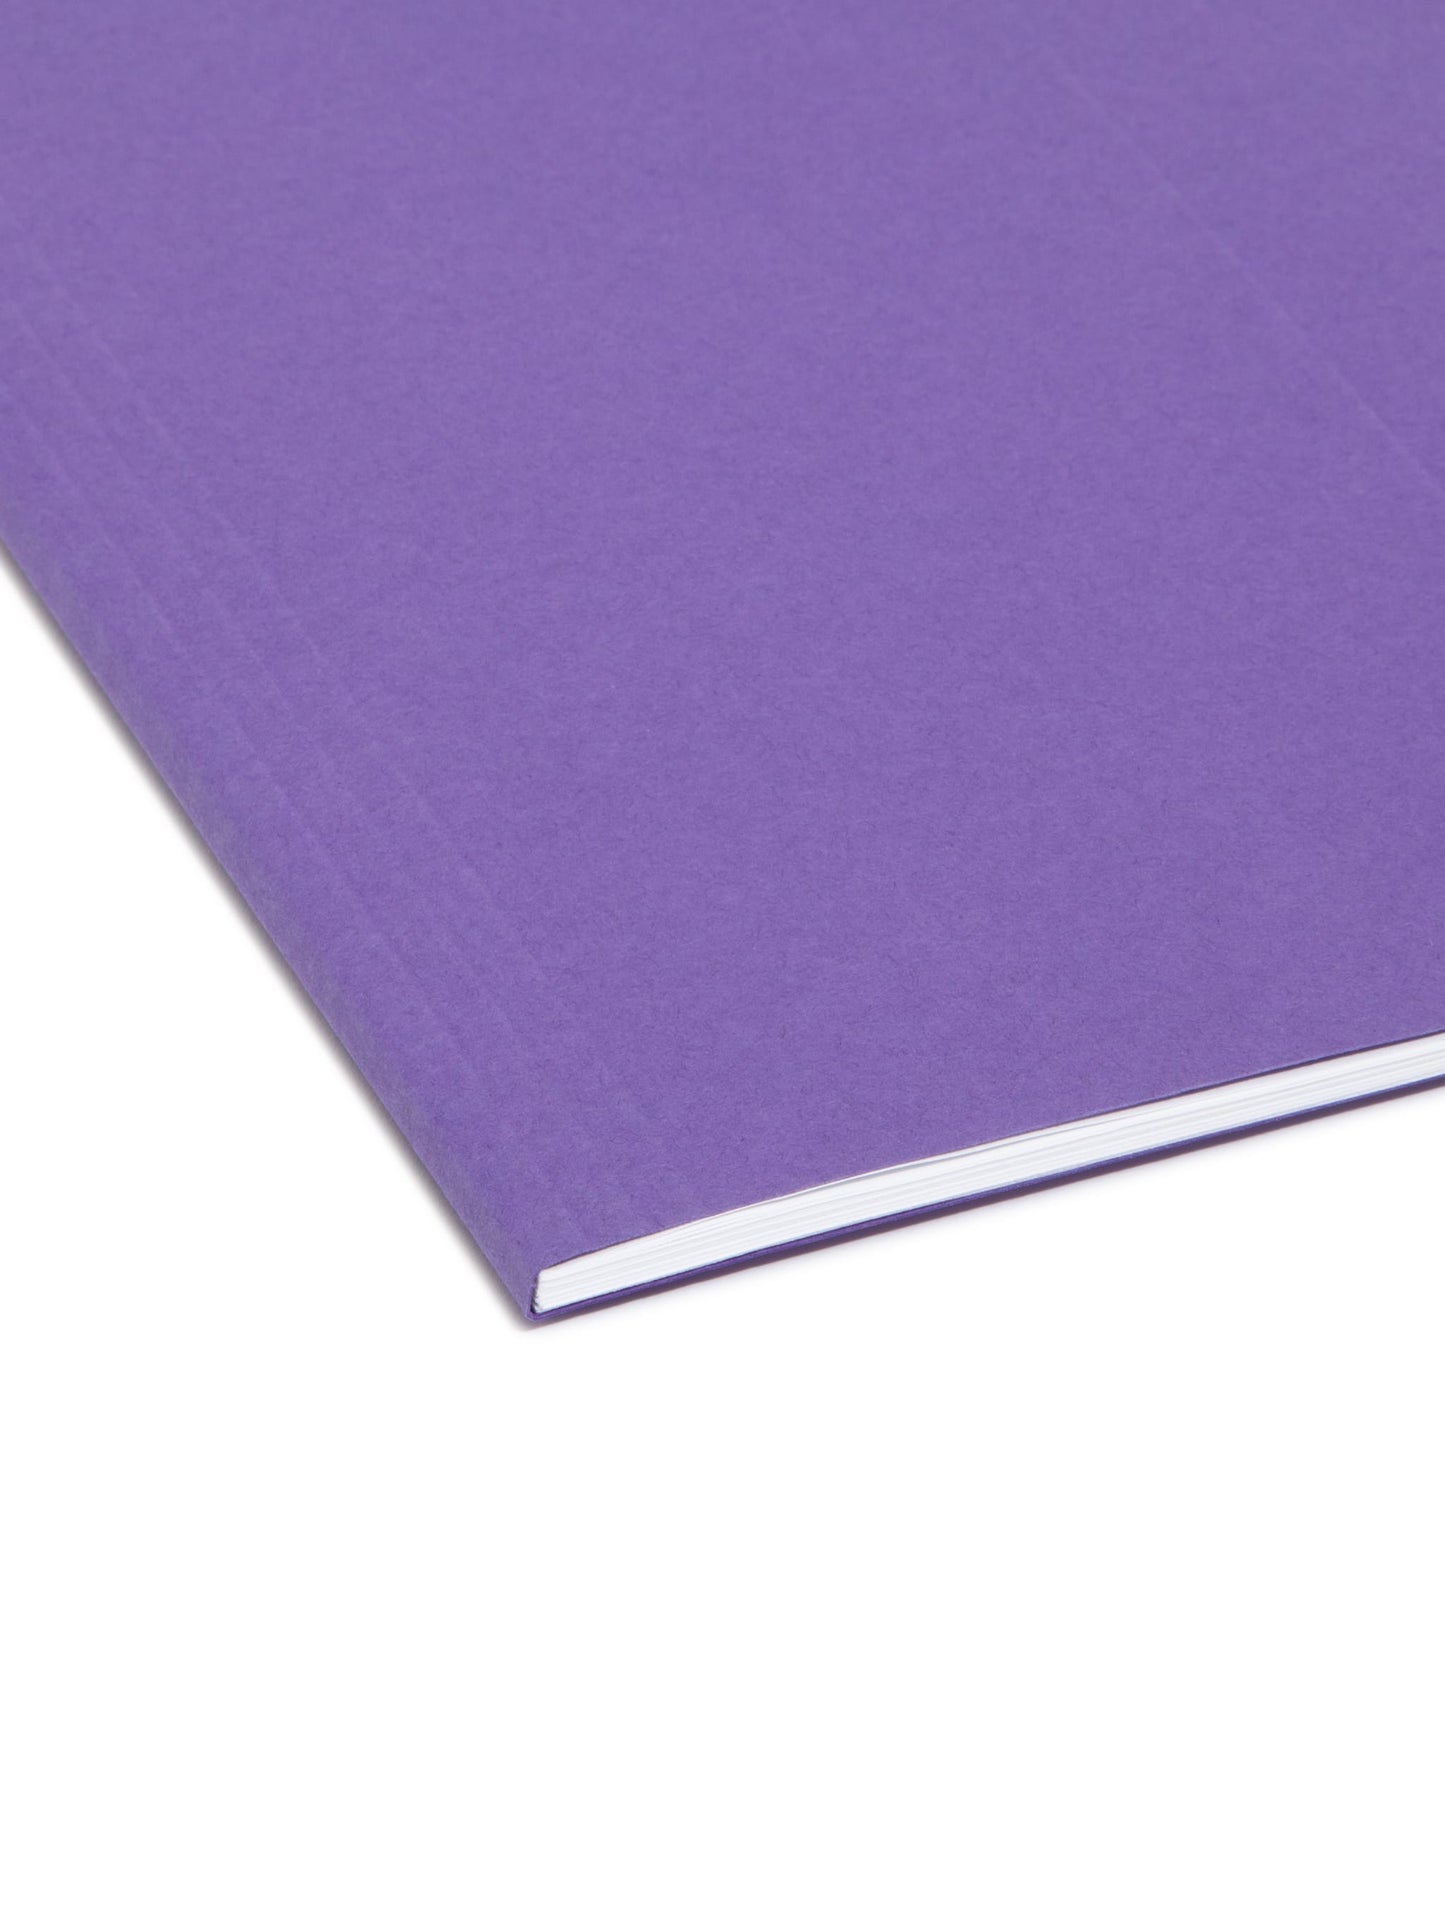 Standard Hanging File Folders with 1/5-Cut Tabs, Purple Color, Letter Size, Set of 25, 086486640725